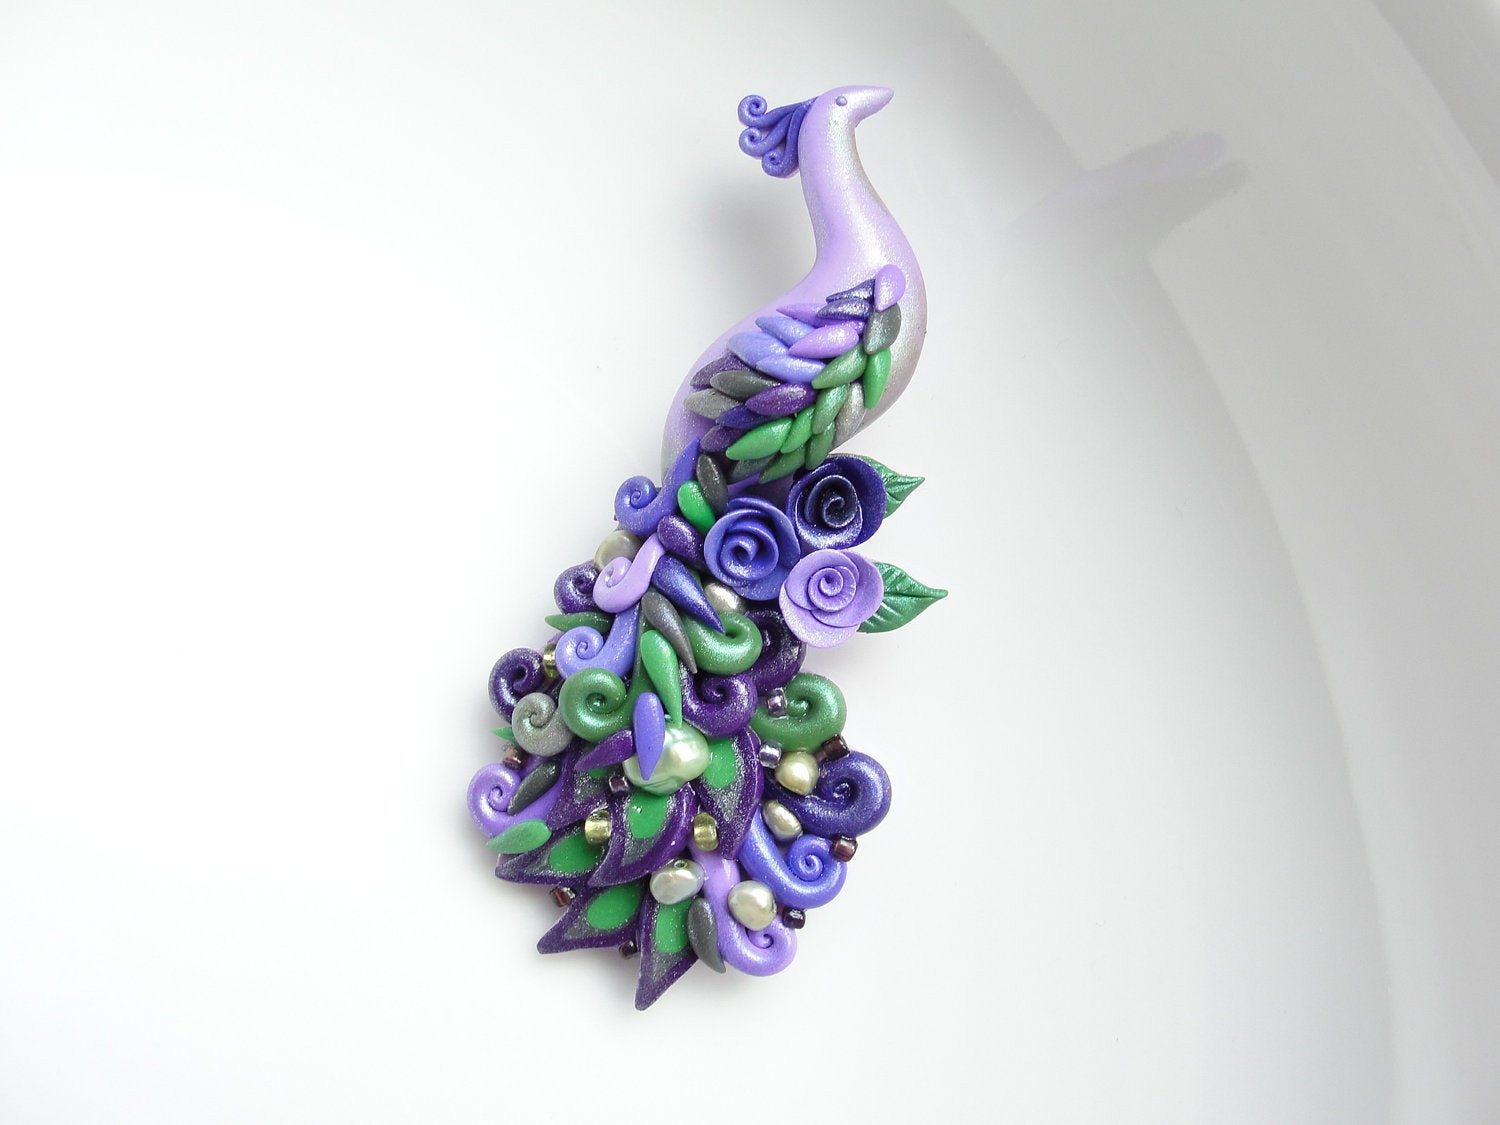 Clay Pins
 Polymer clay peacock brooch pin handmade in purple and green